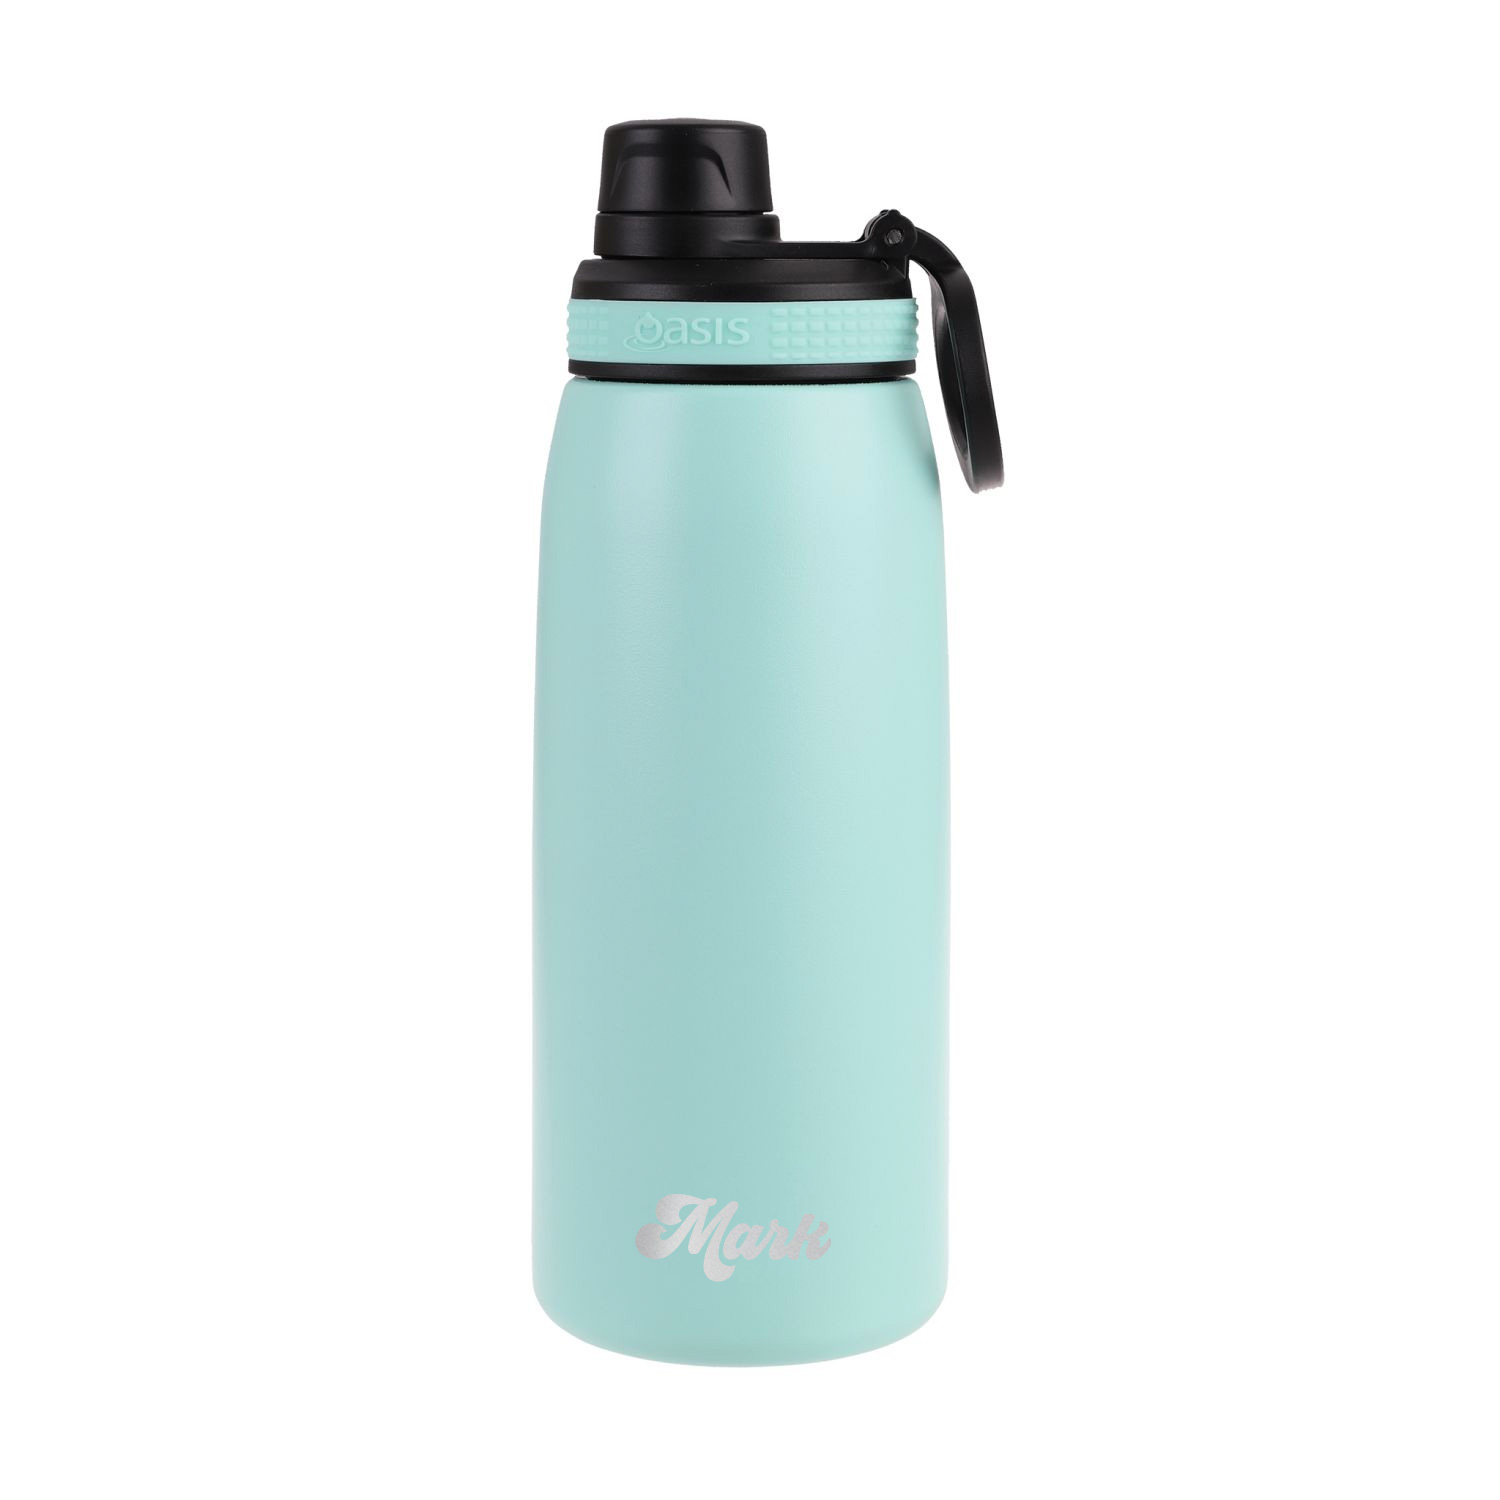 Custom Oasis Stainless Steel Insulated Sports Water Bottle with Screw Cap - Mint